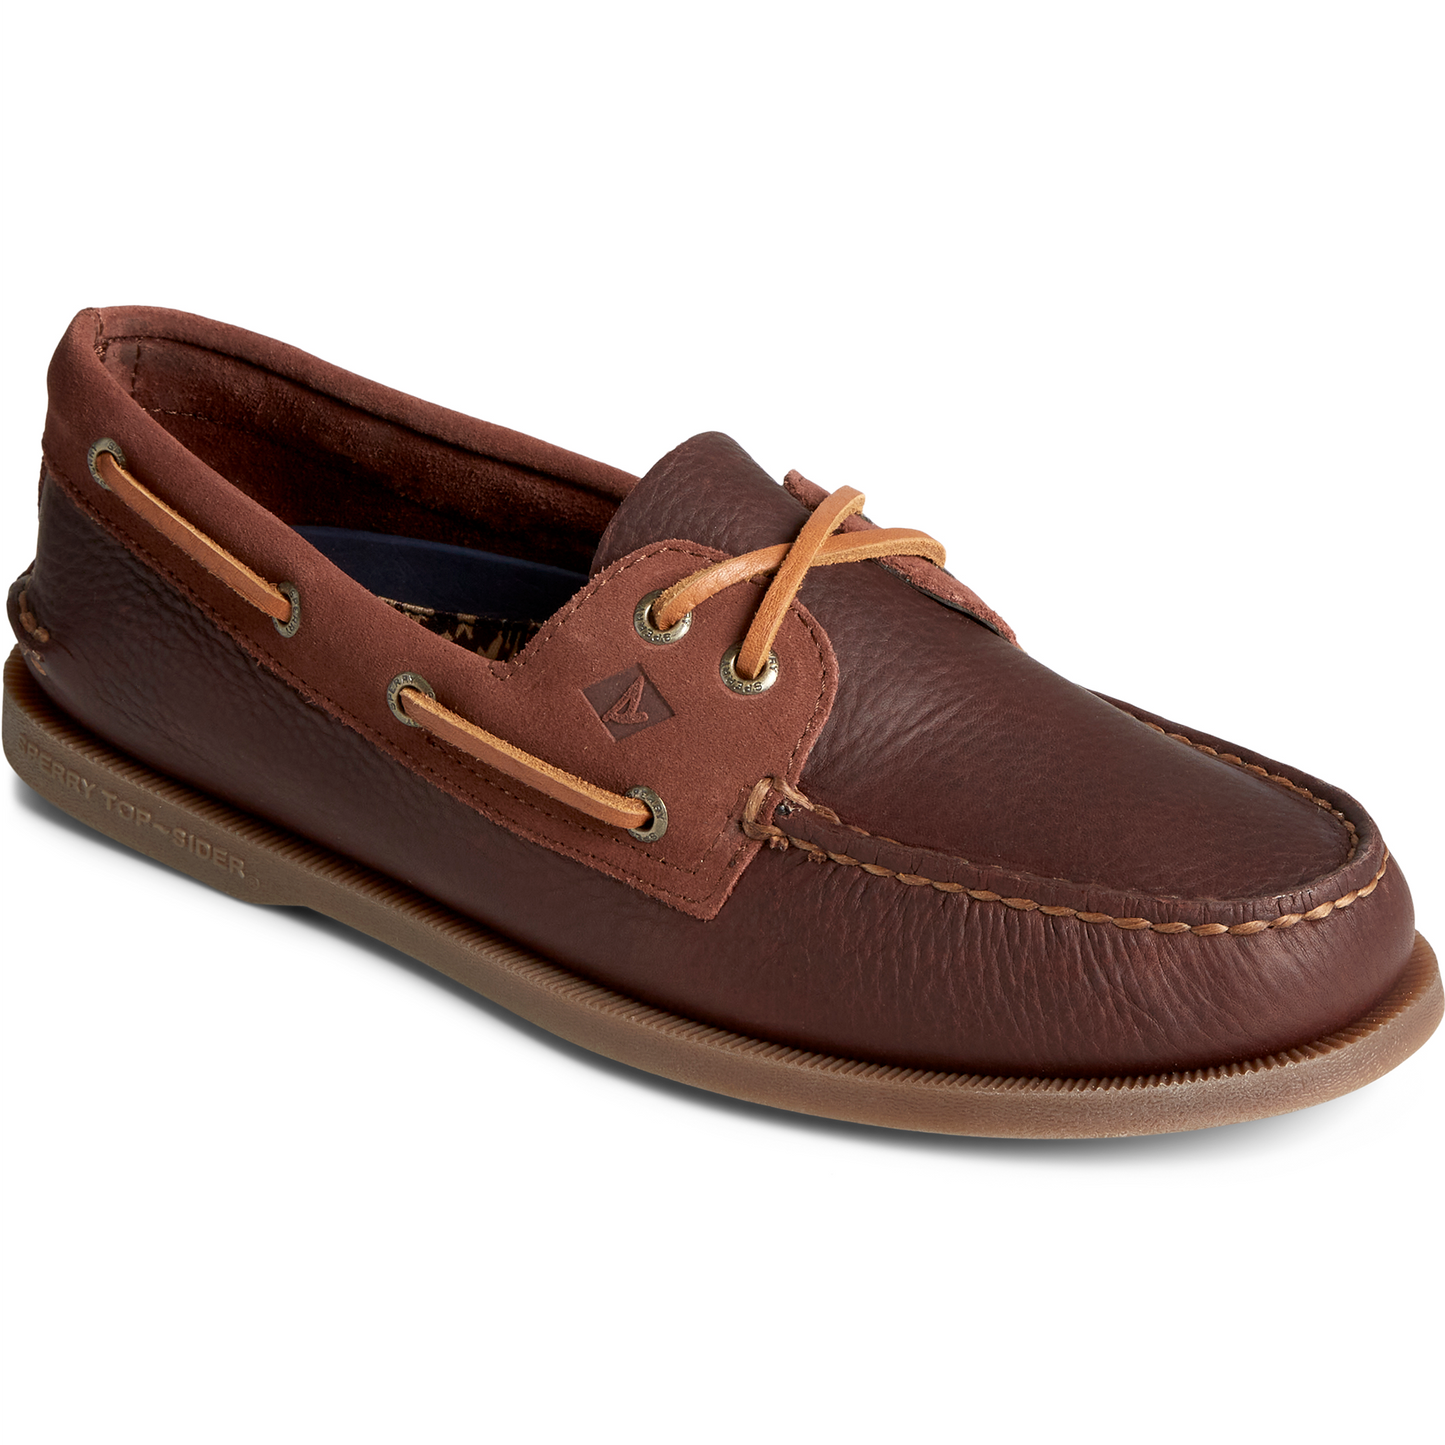 Sperry Men's Authentic Original Tumbled/Suede Boat Shoe - Brown (STS24531)